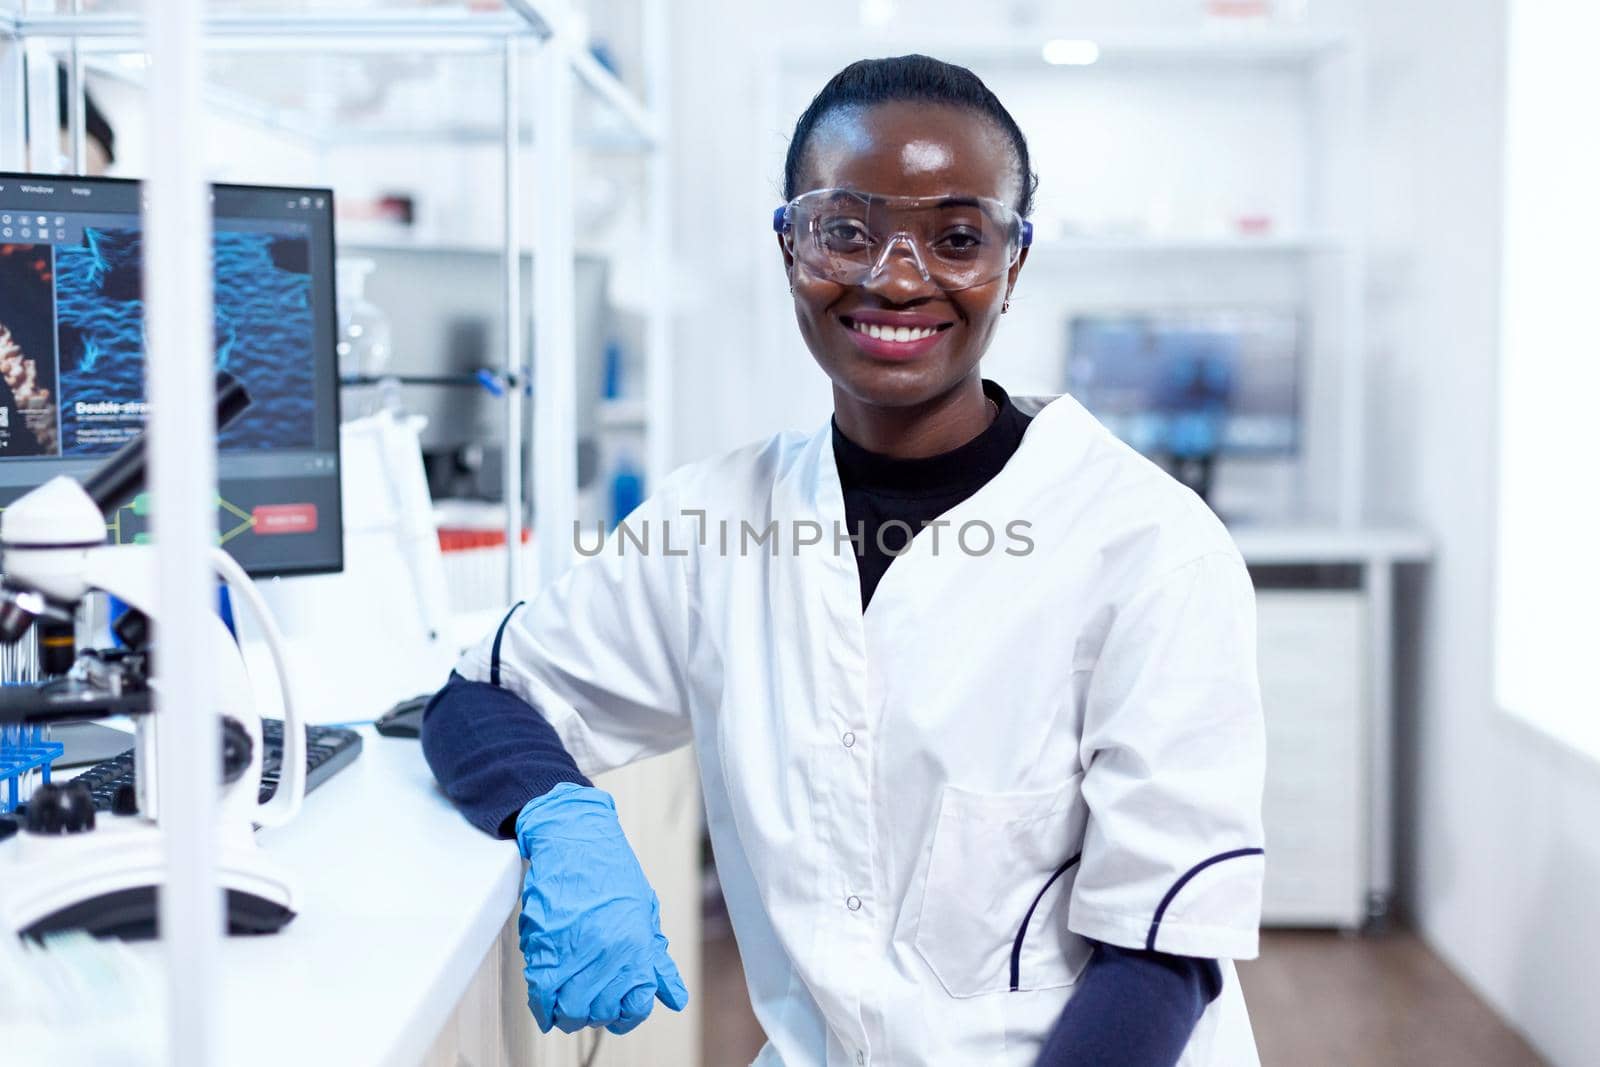 Portrait of professional african scientist smiling at camera in sterile laboratory. Multiethnic team of researchers working in microbiology lab testing solution for medical purpose.